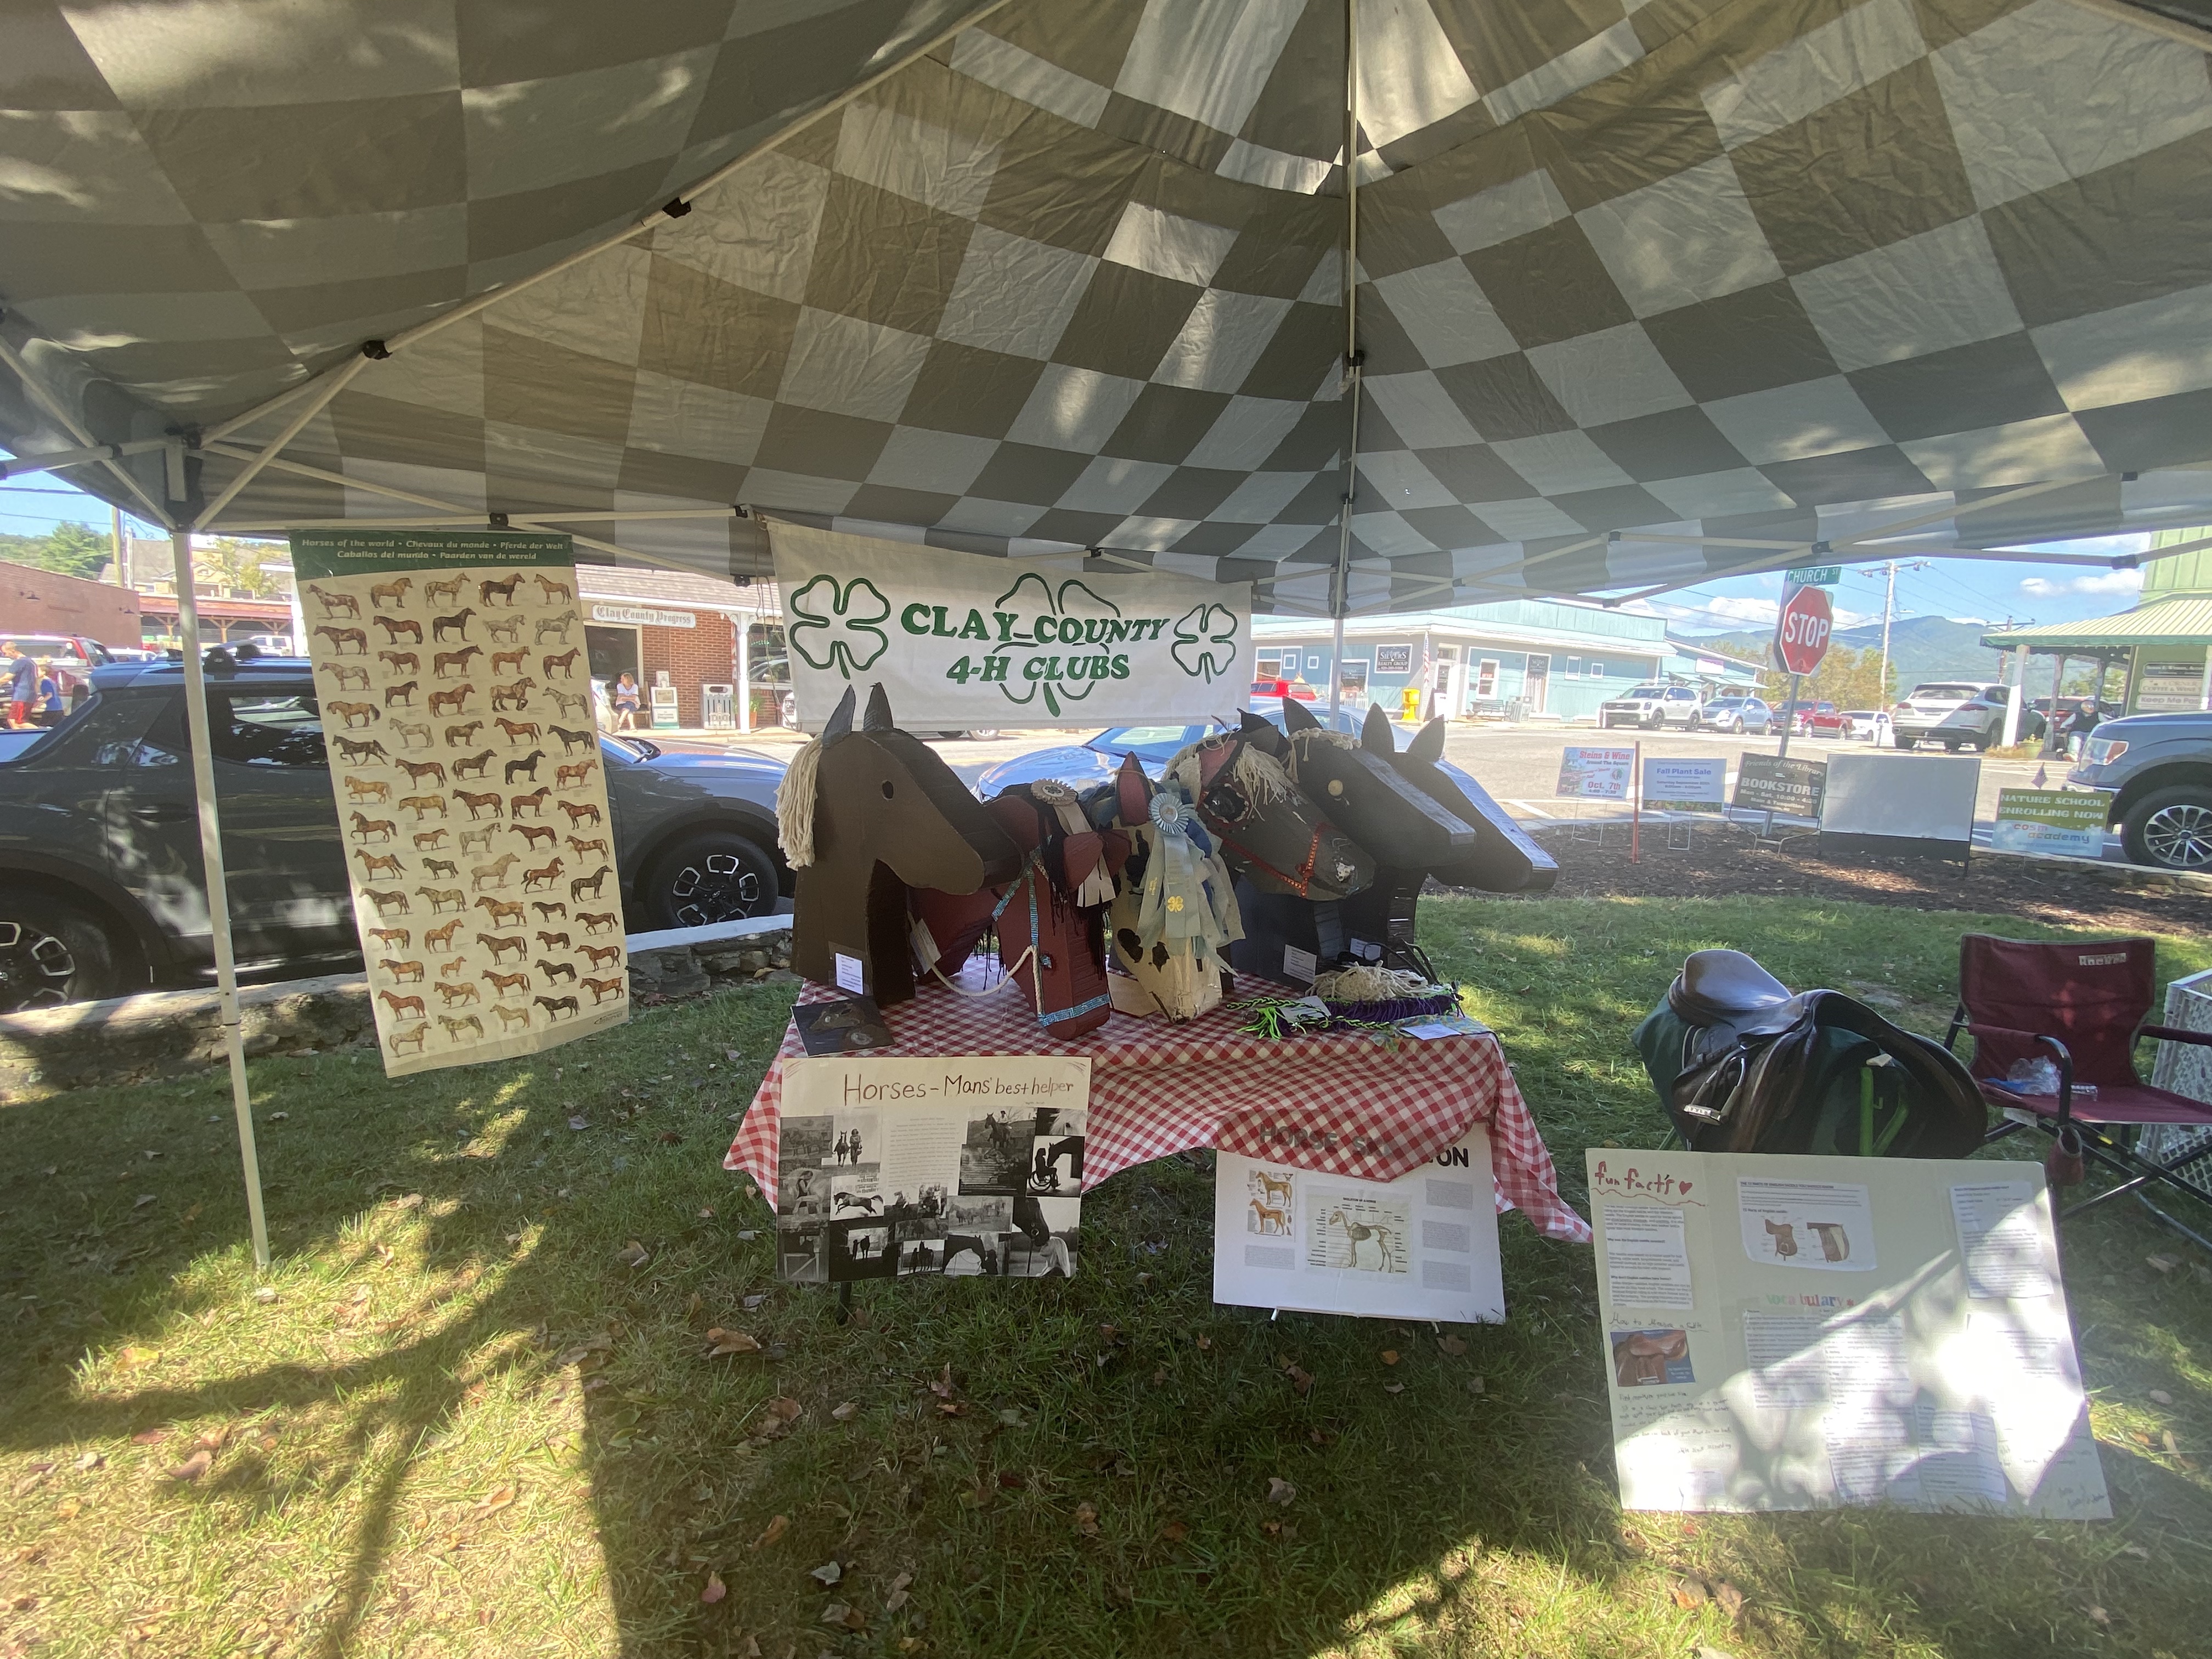 4-H Clubs Booth with horse club info